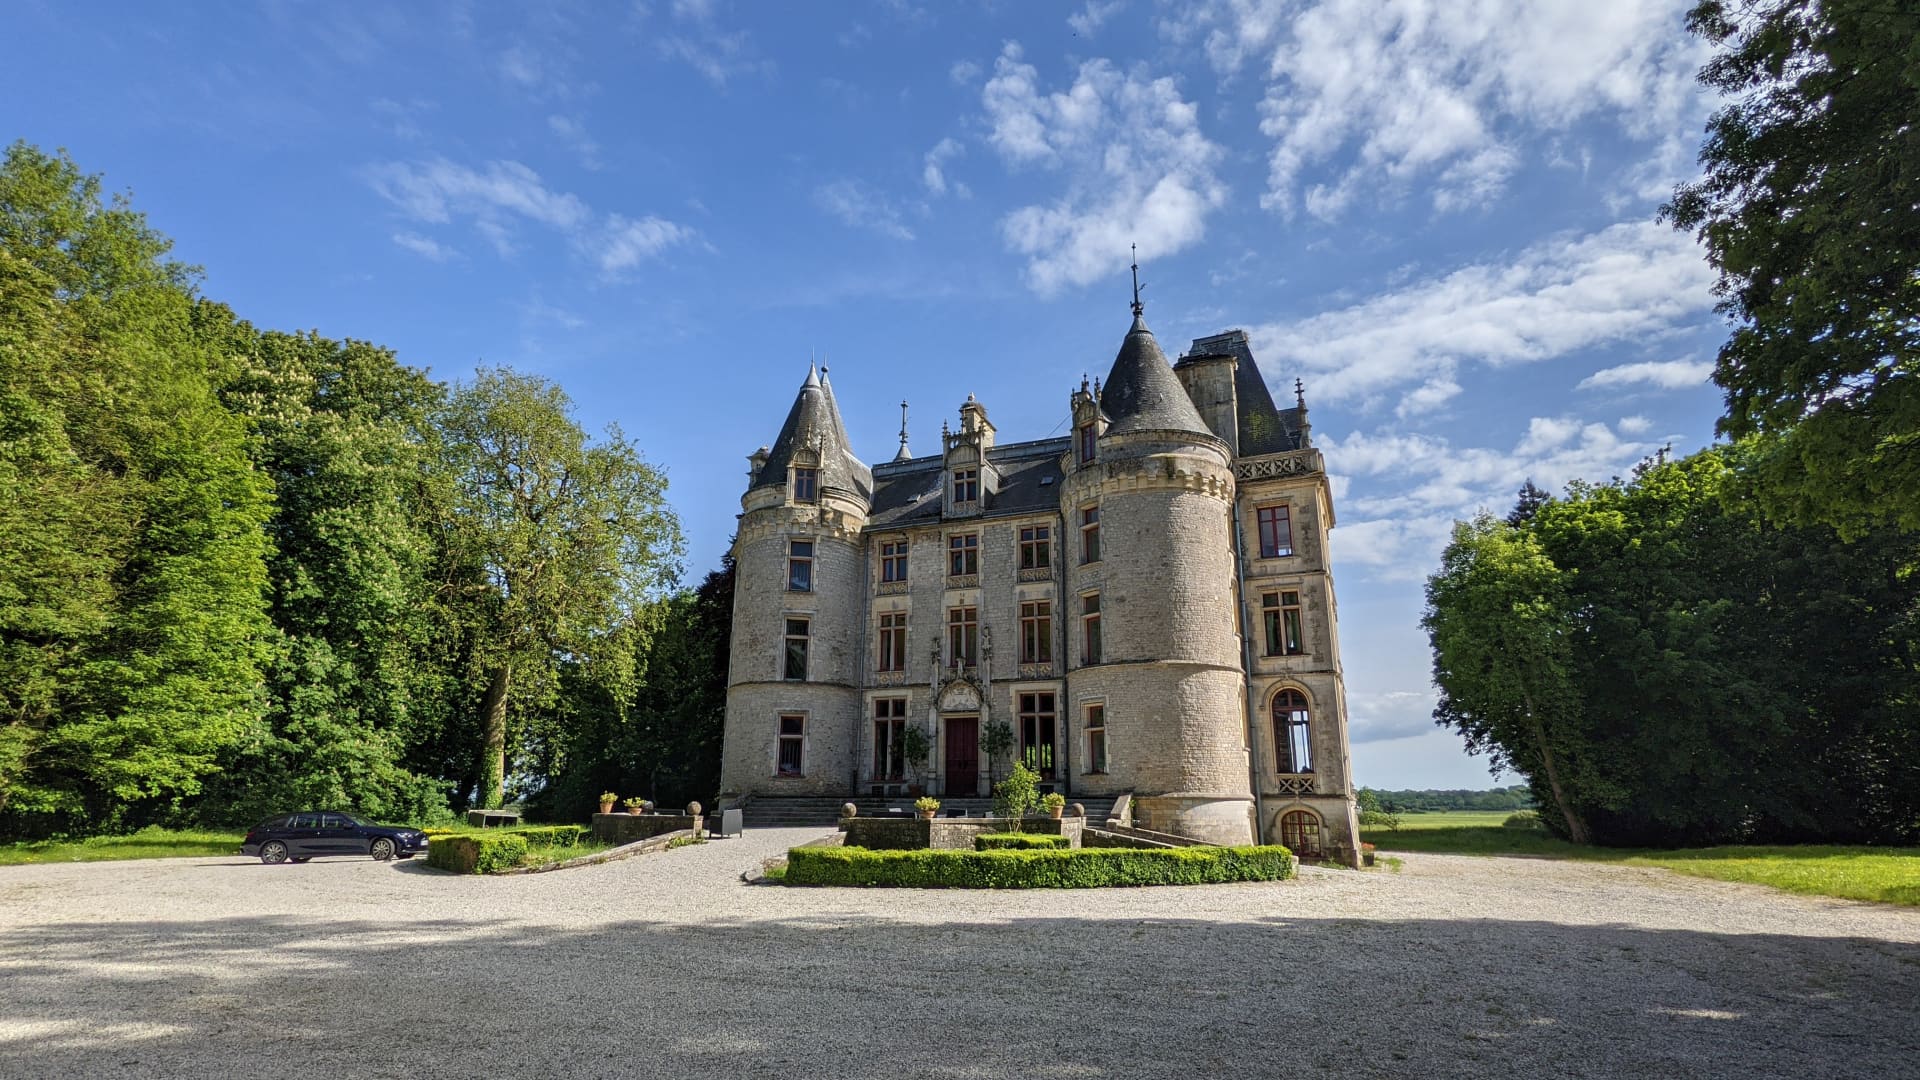 Remote work stays in this castle in Manche, France start at 350 euros ($420) per week.